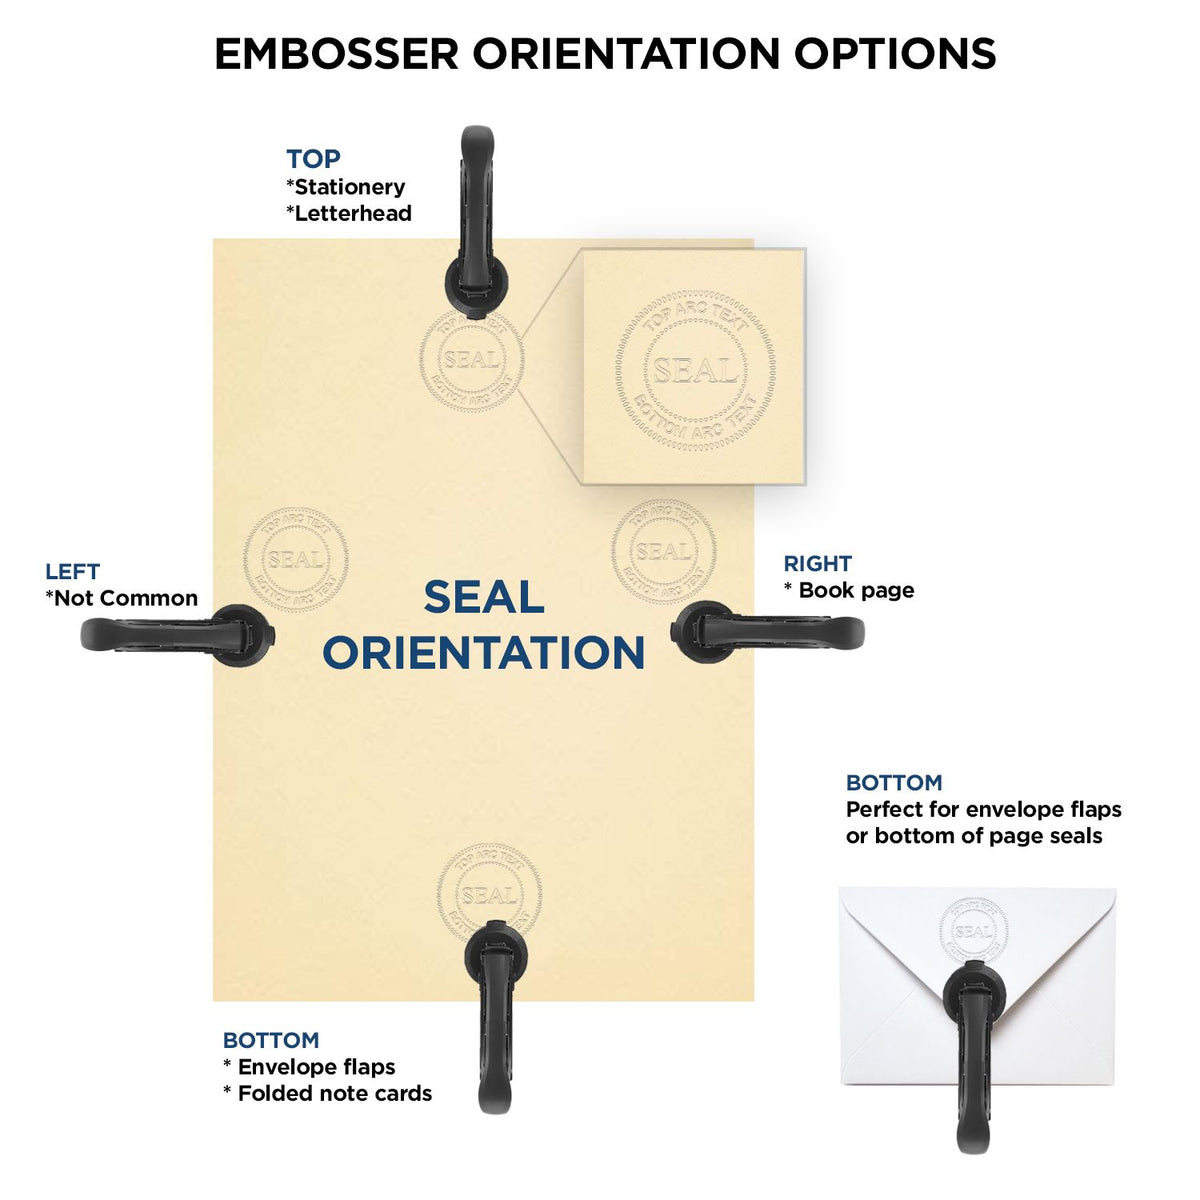 An infographic for the State of Delaware Long Reach Architectural Embossing Seal showing embosser orientation, this is showing examples of a top, bottom, right and left insert.